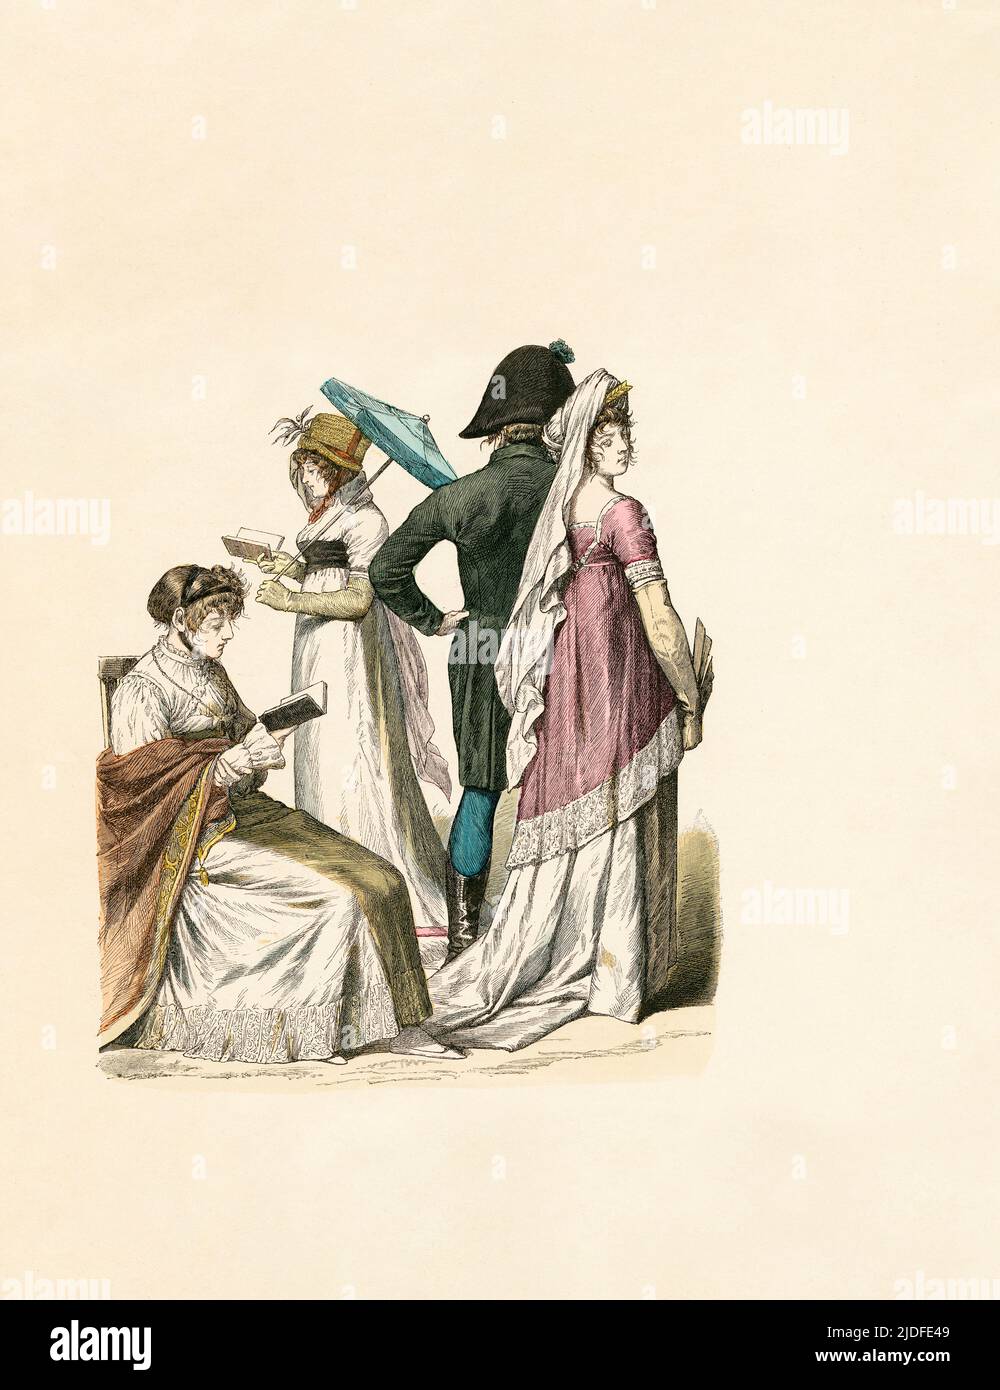 Empire Style, Germany and France, 1802-1804, Illustration, The History of Costume, Braun & Schneider, Munich, Germany, 1861-1880 Stock Photo